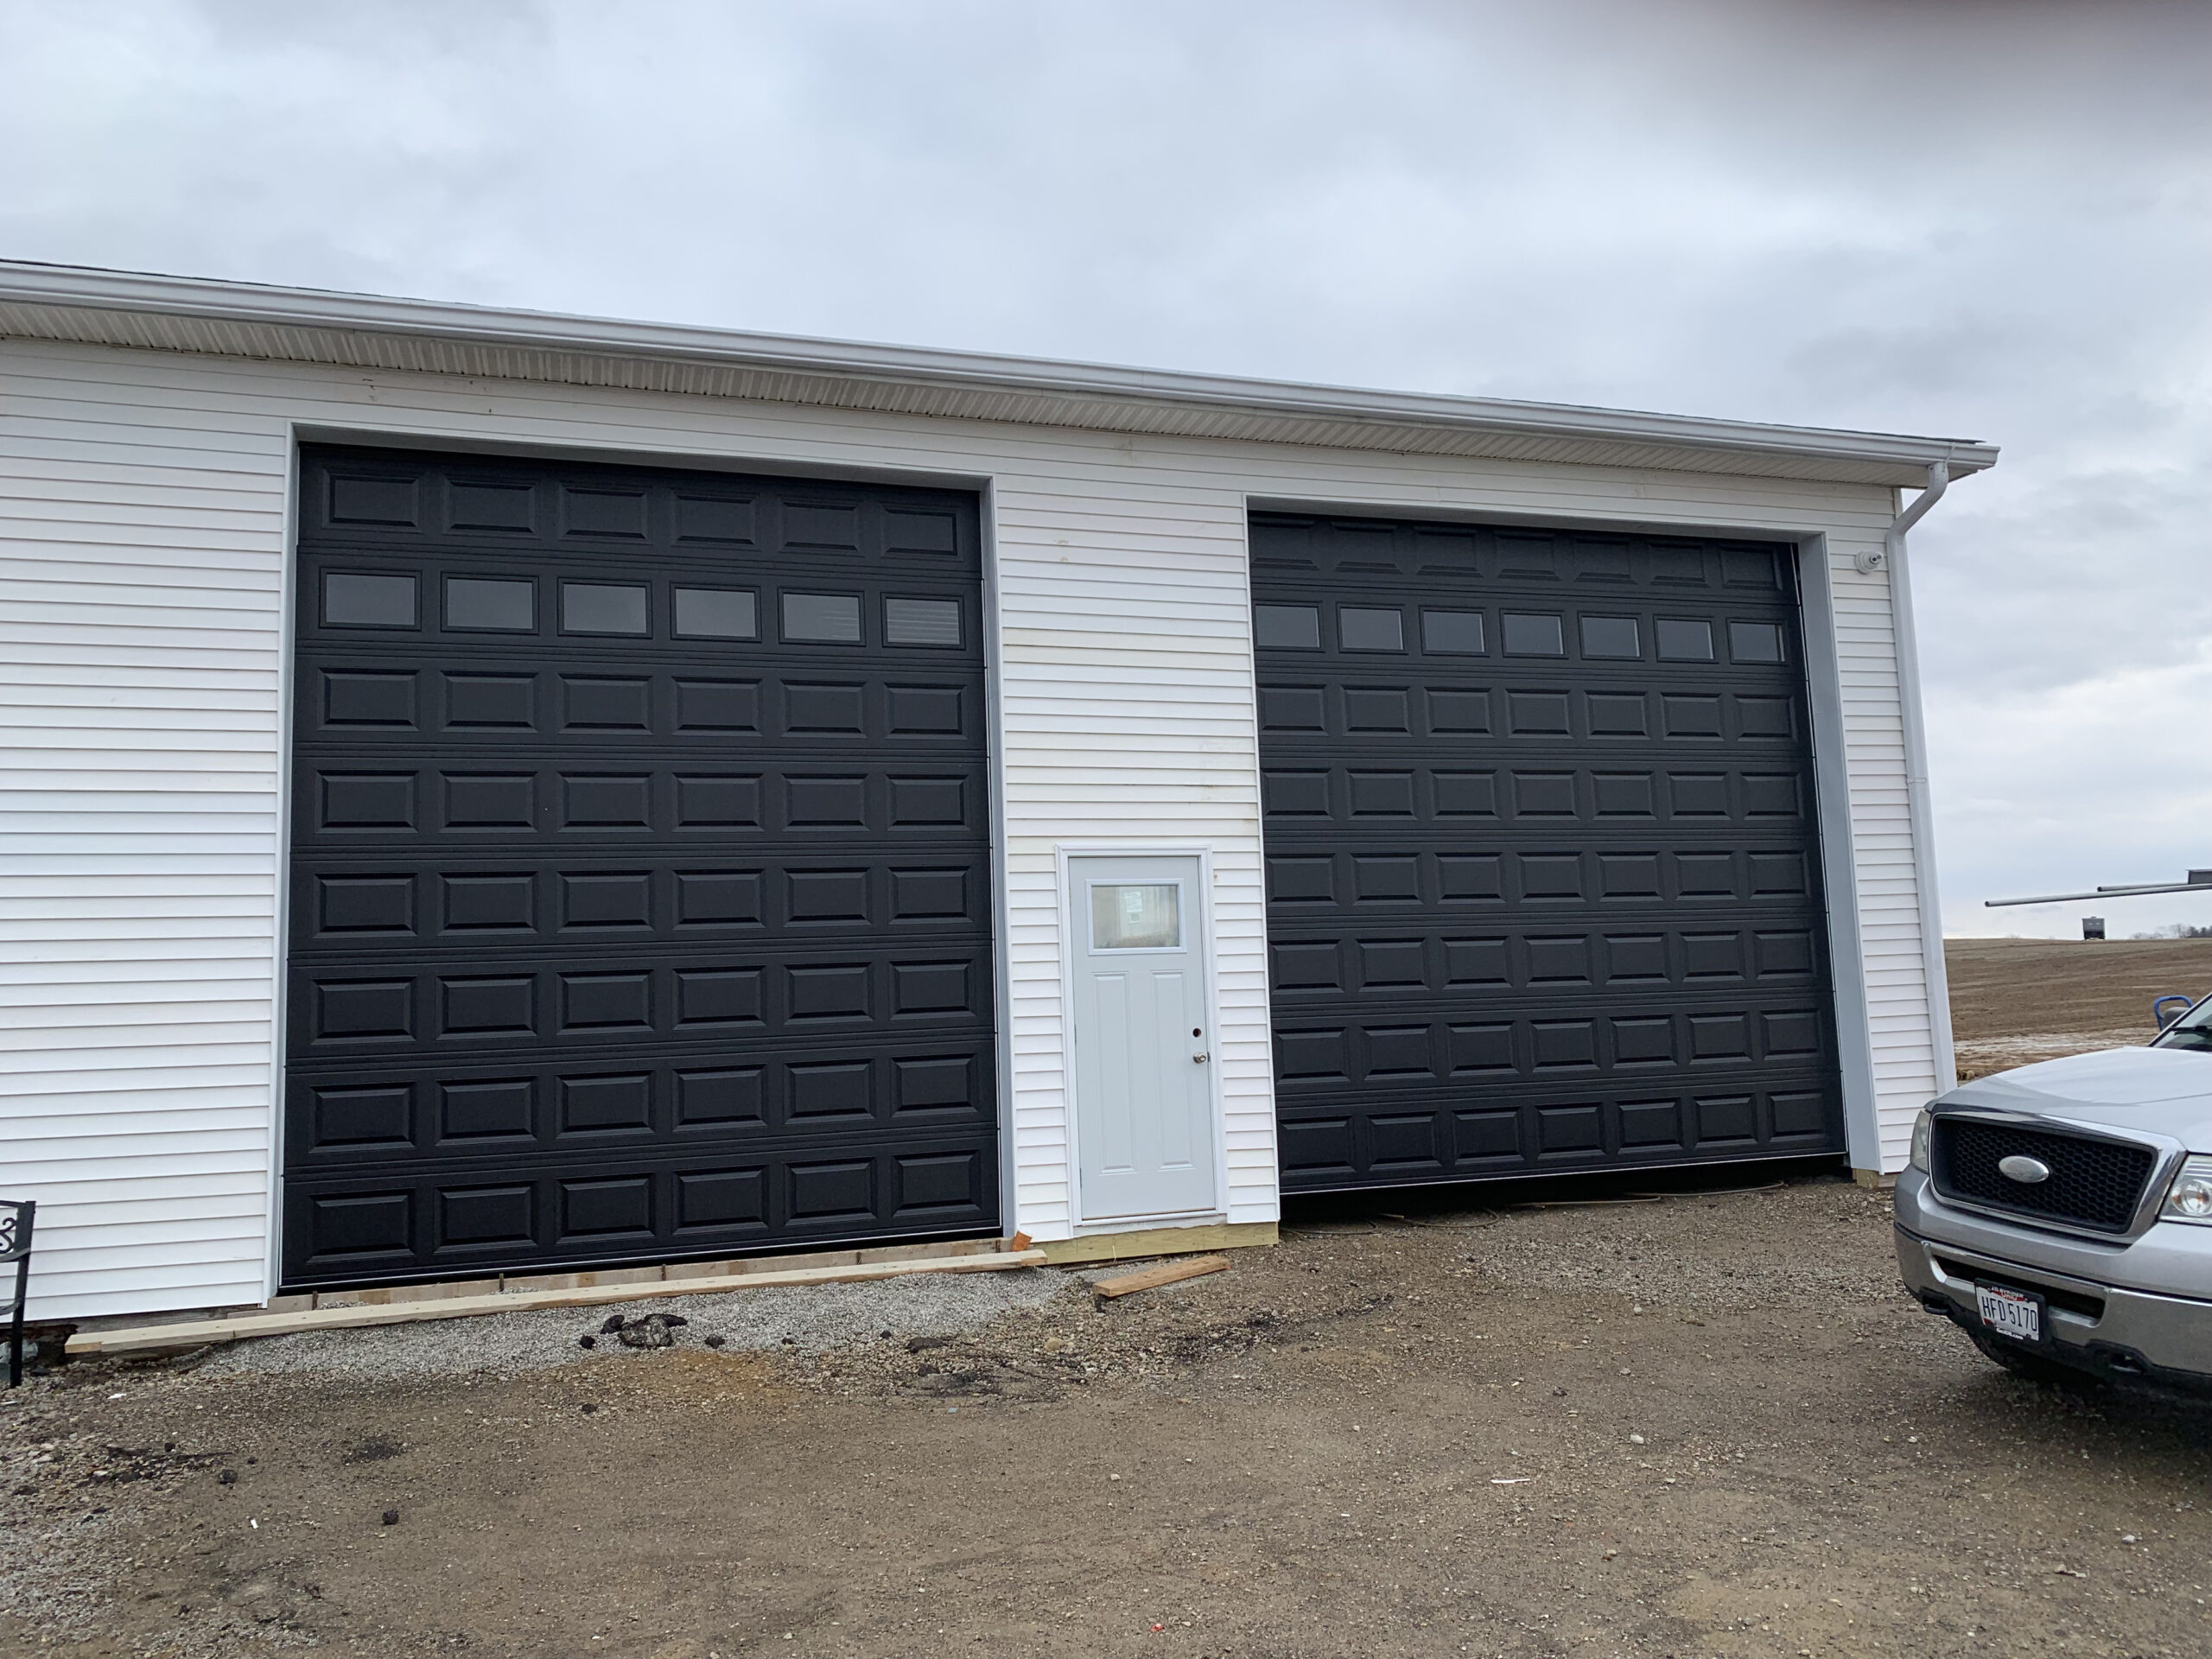 Tall Black traditional garage doors with windows. 